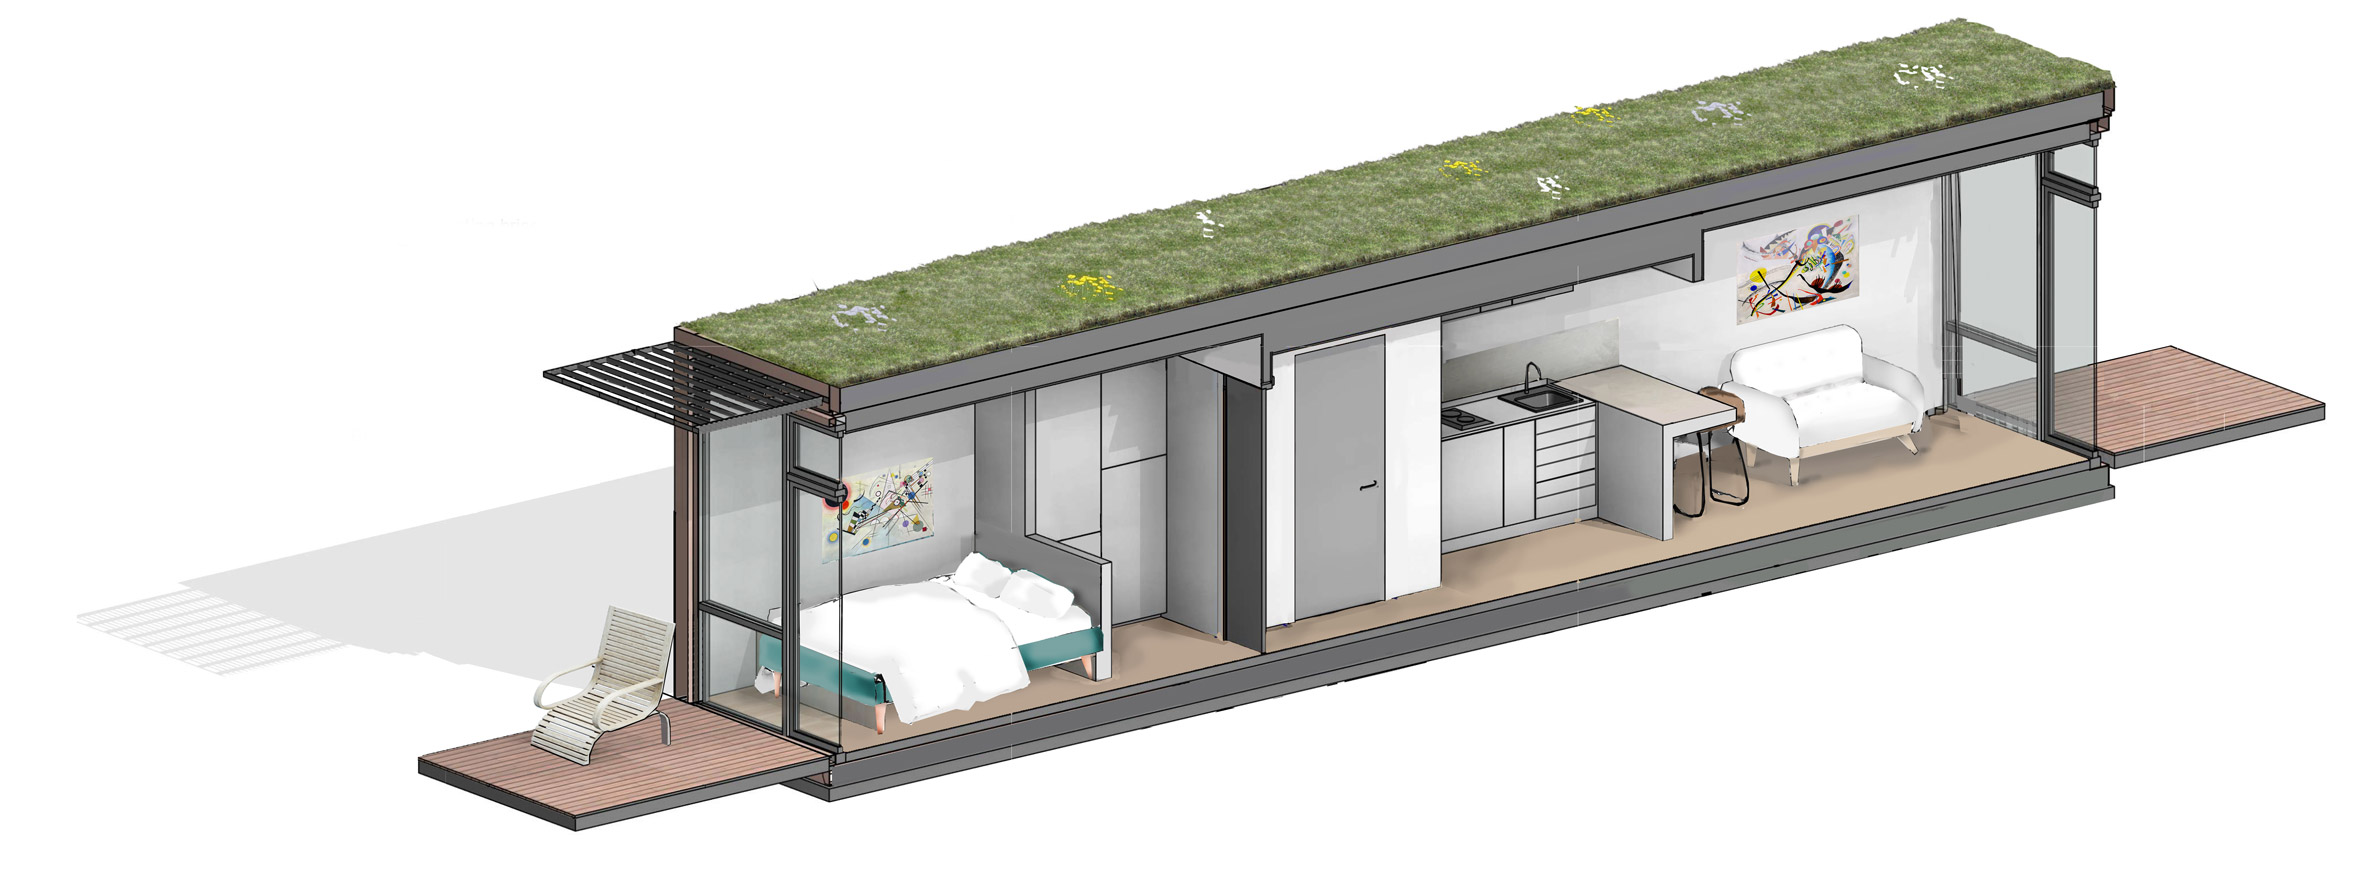 Shipping container micro homes with green roofs designed by Fraser Brown MacKenna Architects